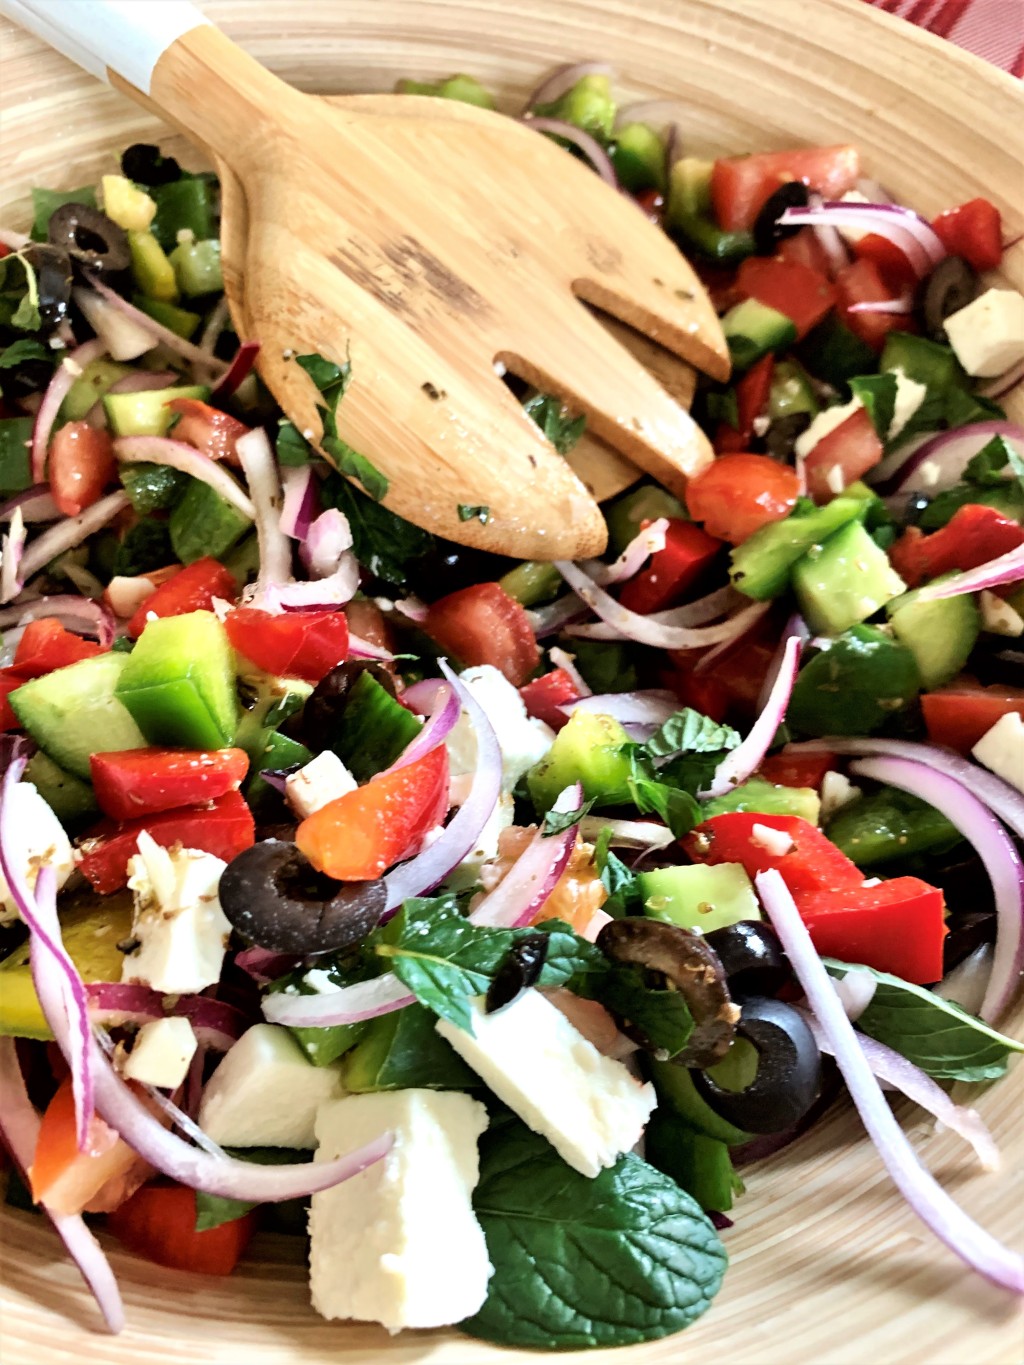 Image shows a close up of the greek salad